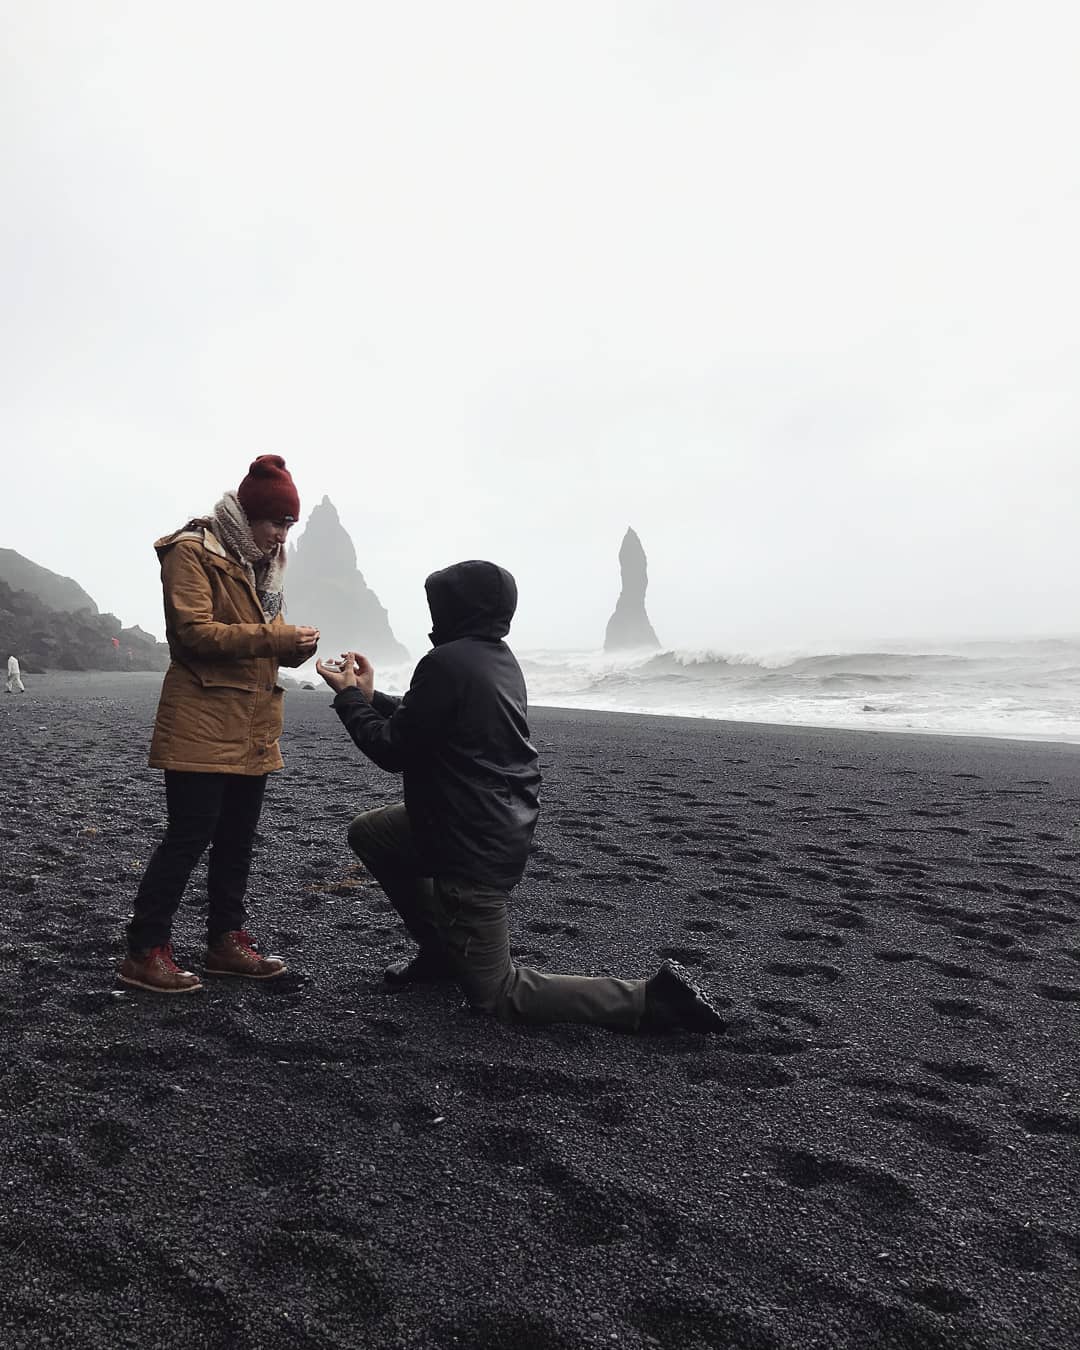 Man proposing to woman in a romantic proposal in Iceland